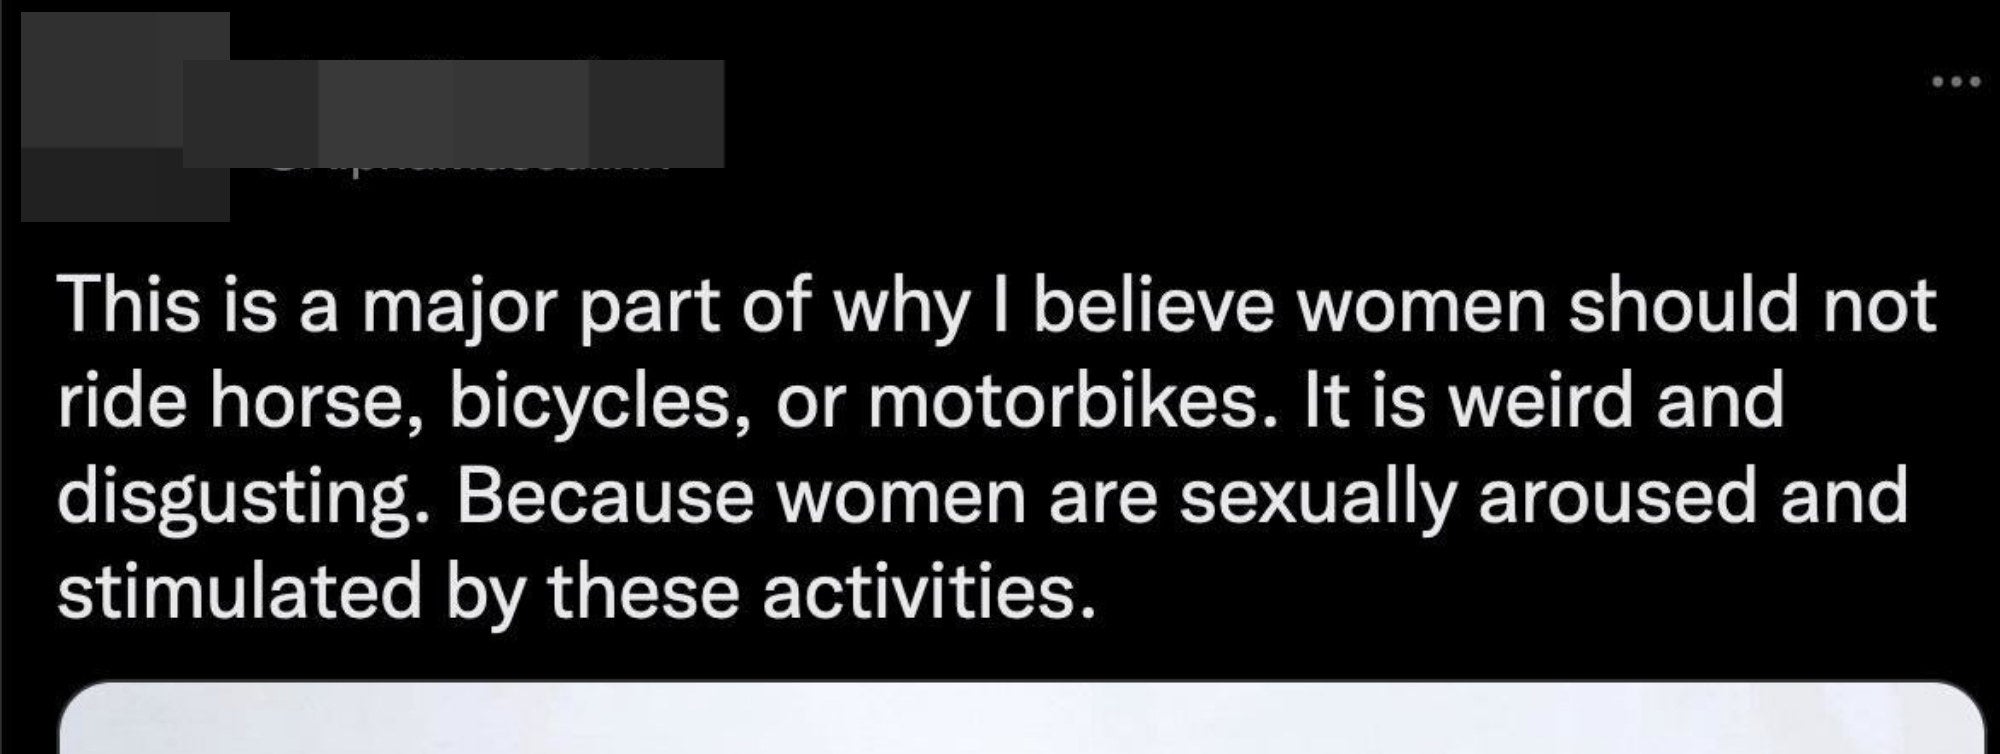 &quot;This is a major part of why I believe women should not ride horses, bicycles, or motorbikes: It is weird and disgusting because women are sexually aroused and stimulated by these activities&quot;